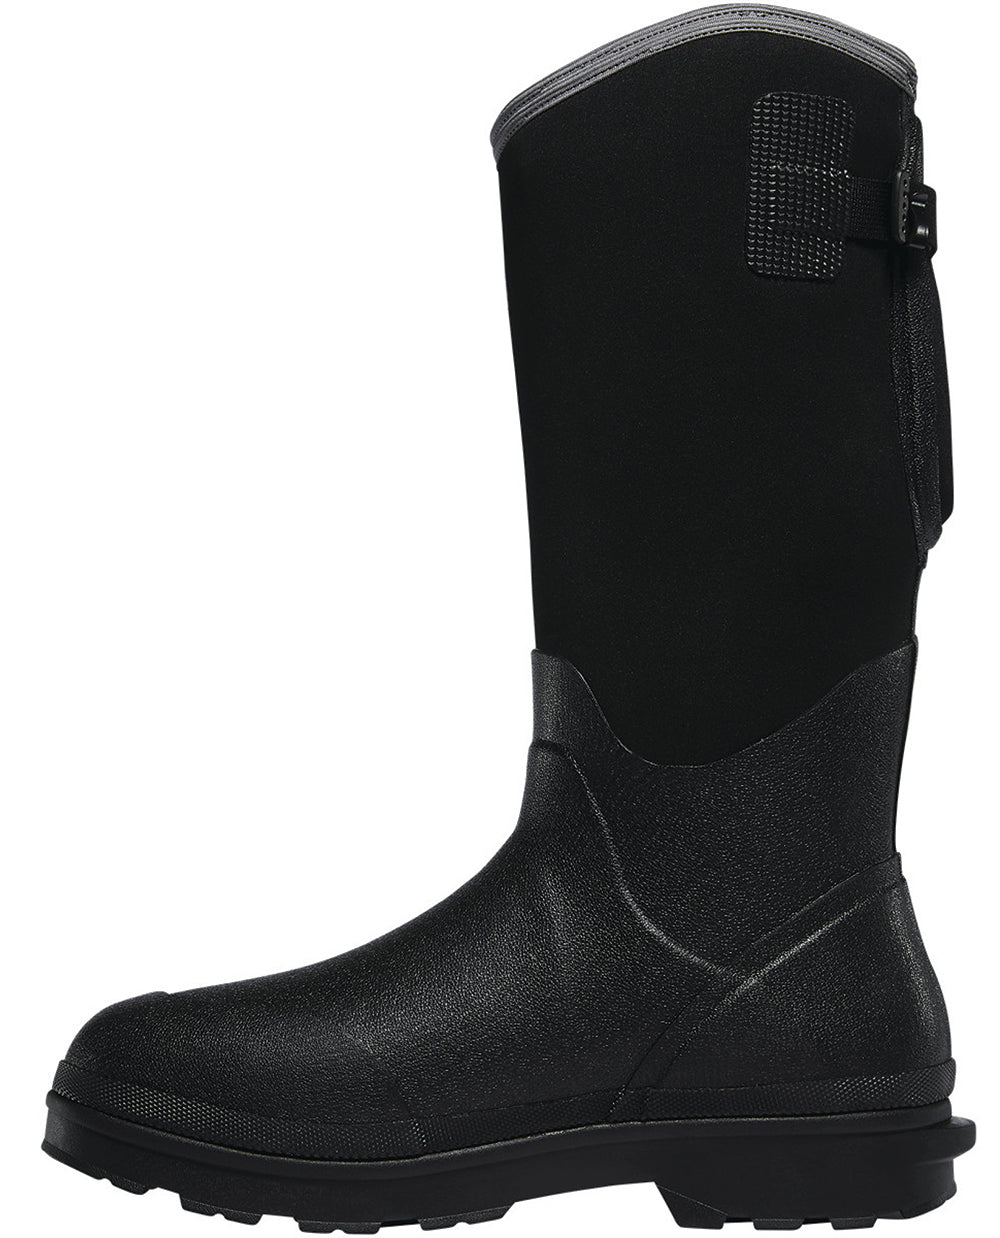 whistle workwear boots